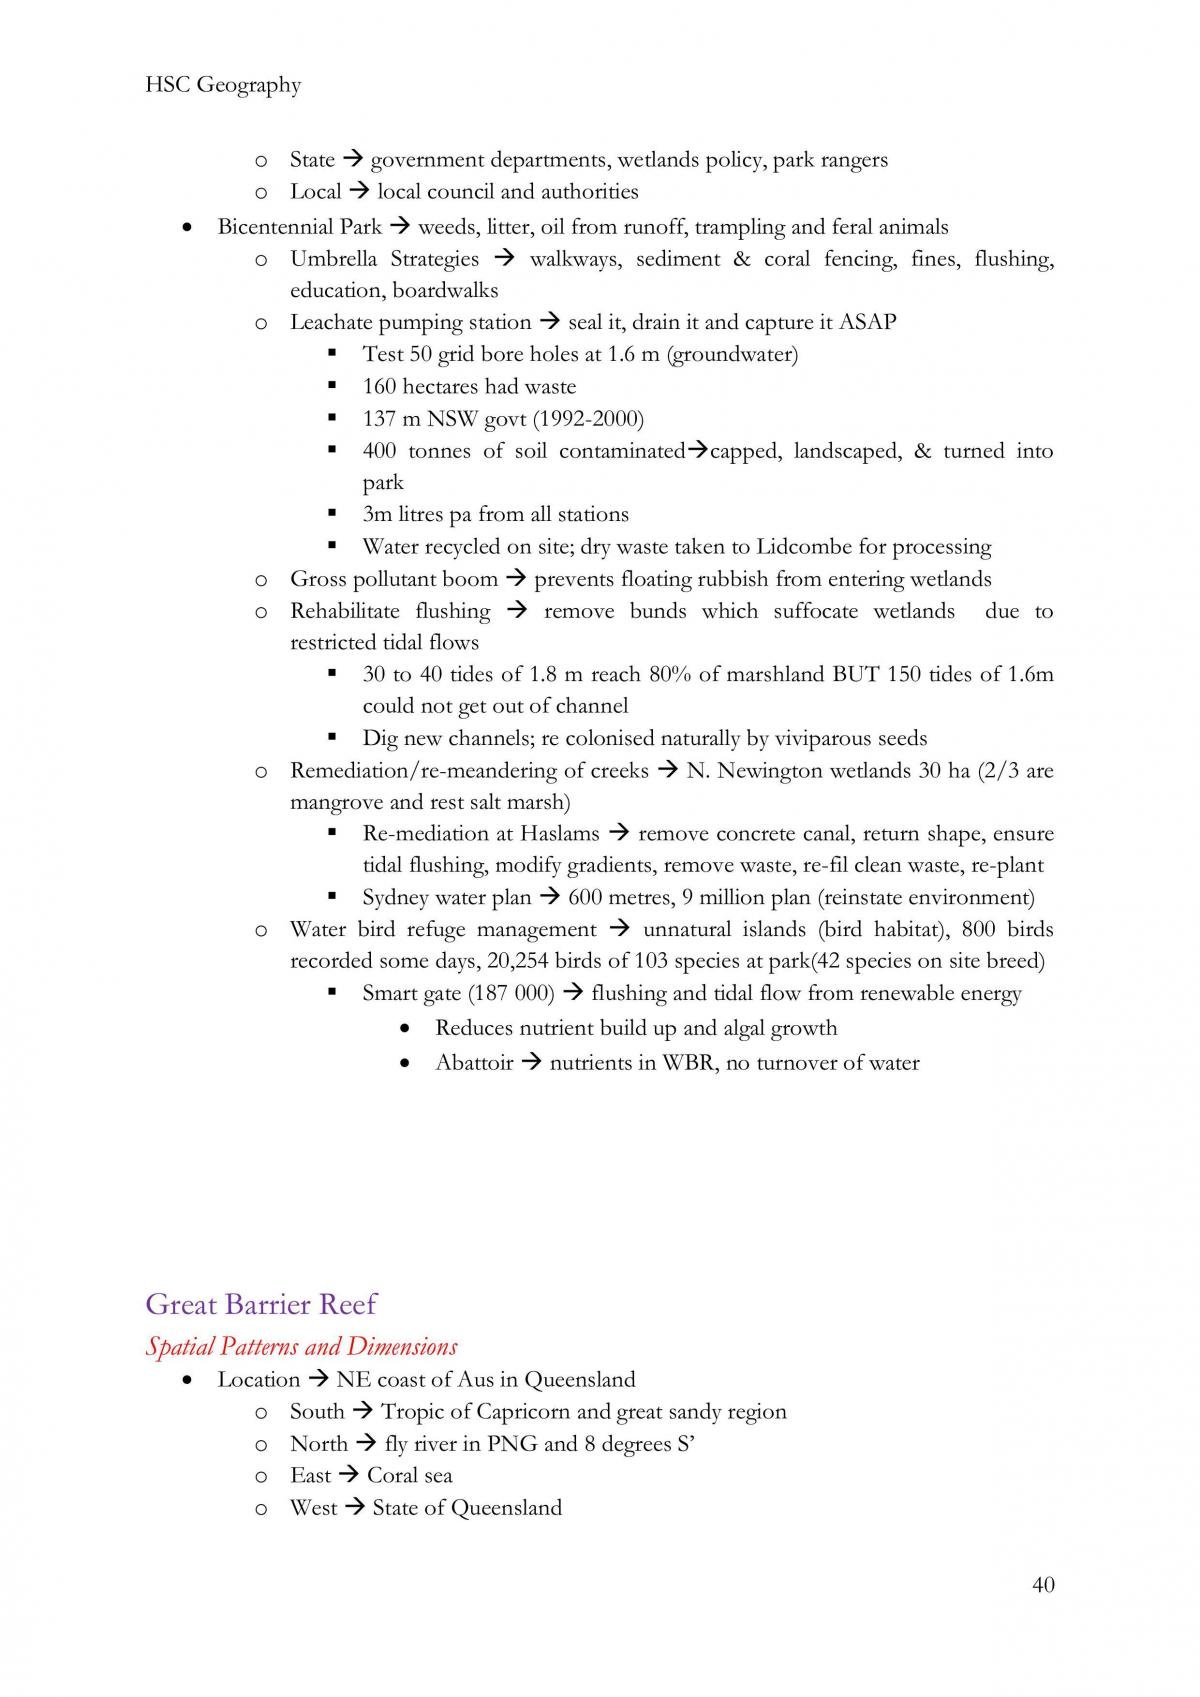 HSC Geography Notes - Page 40